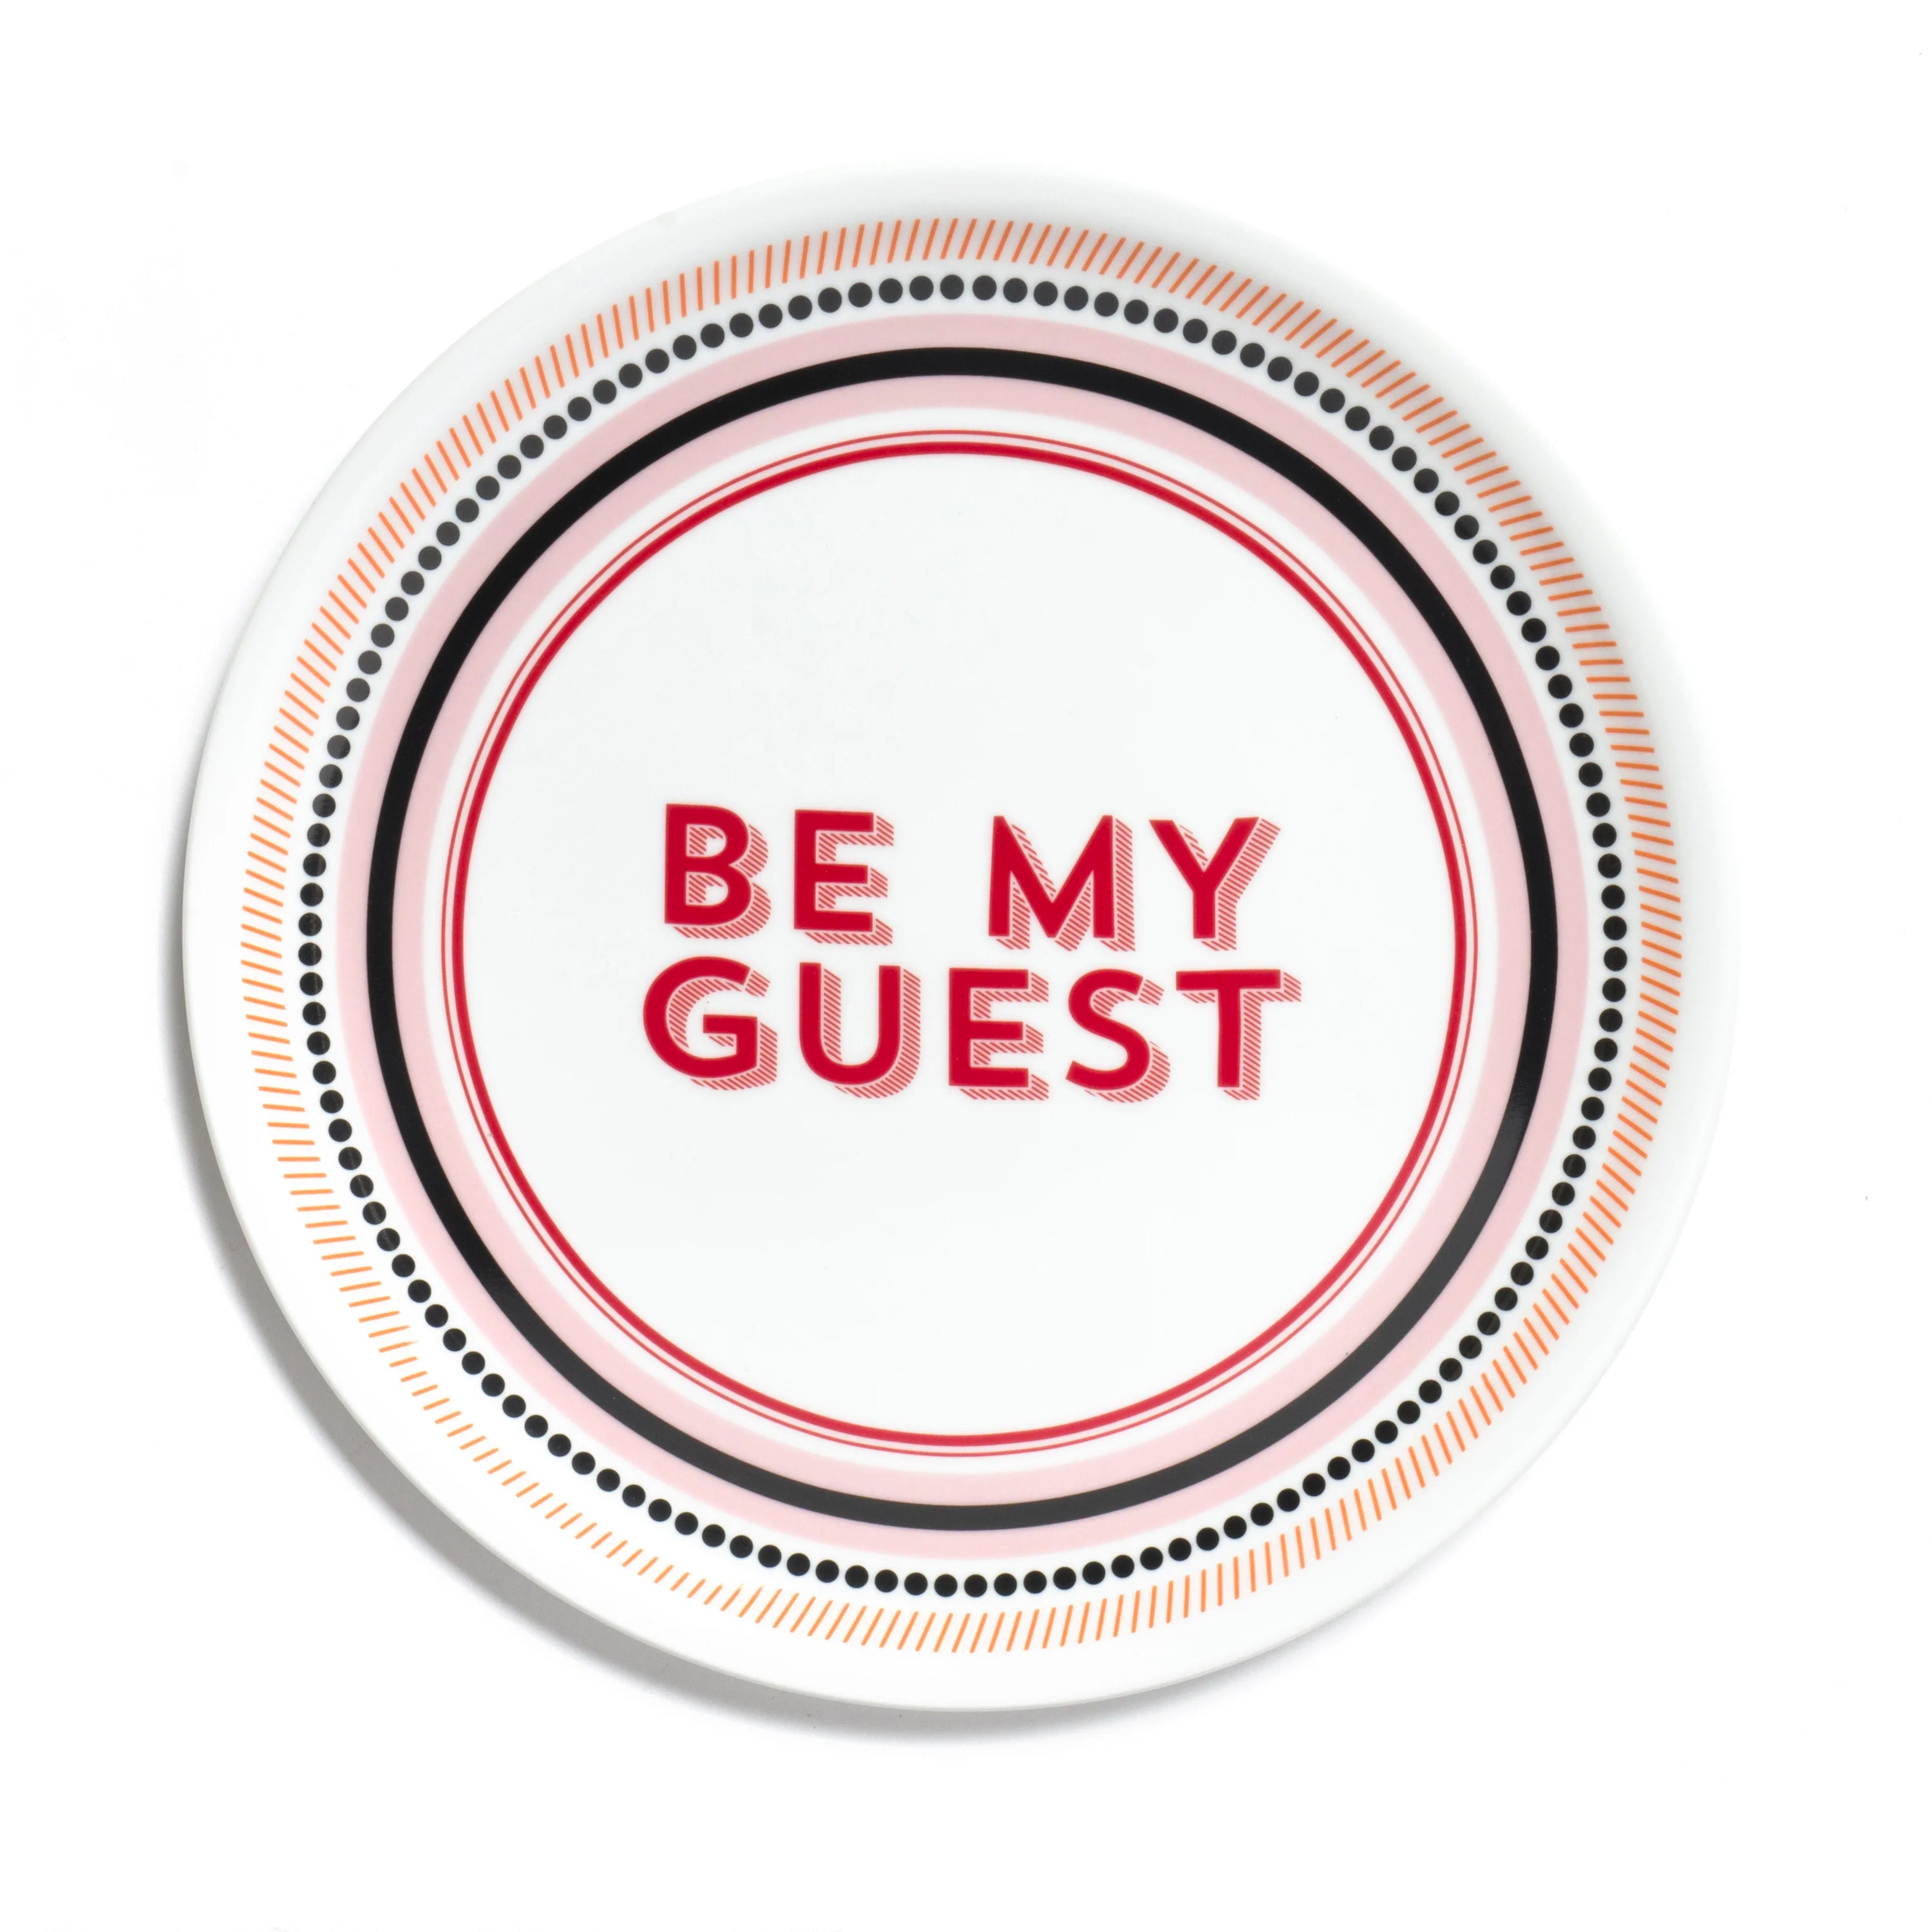 BE MY GUEST PIZZA PLATE SET OF 2